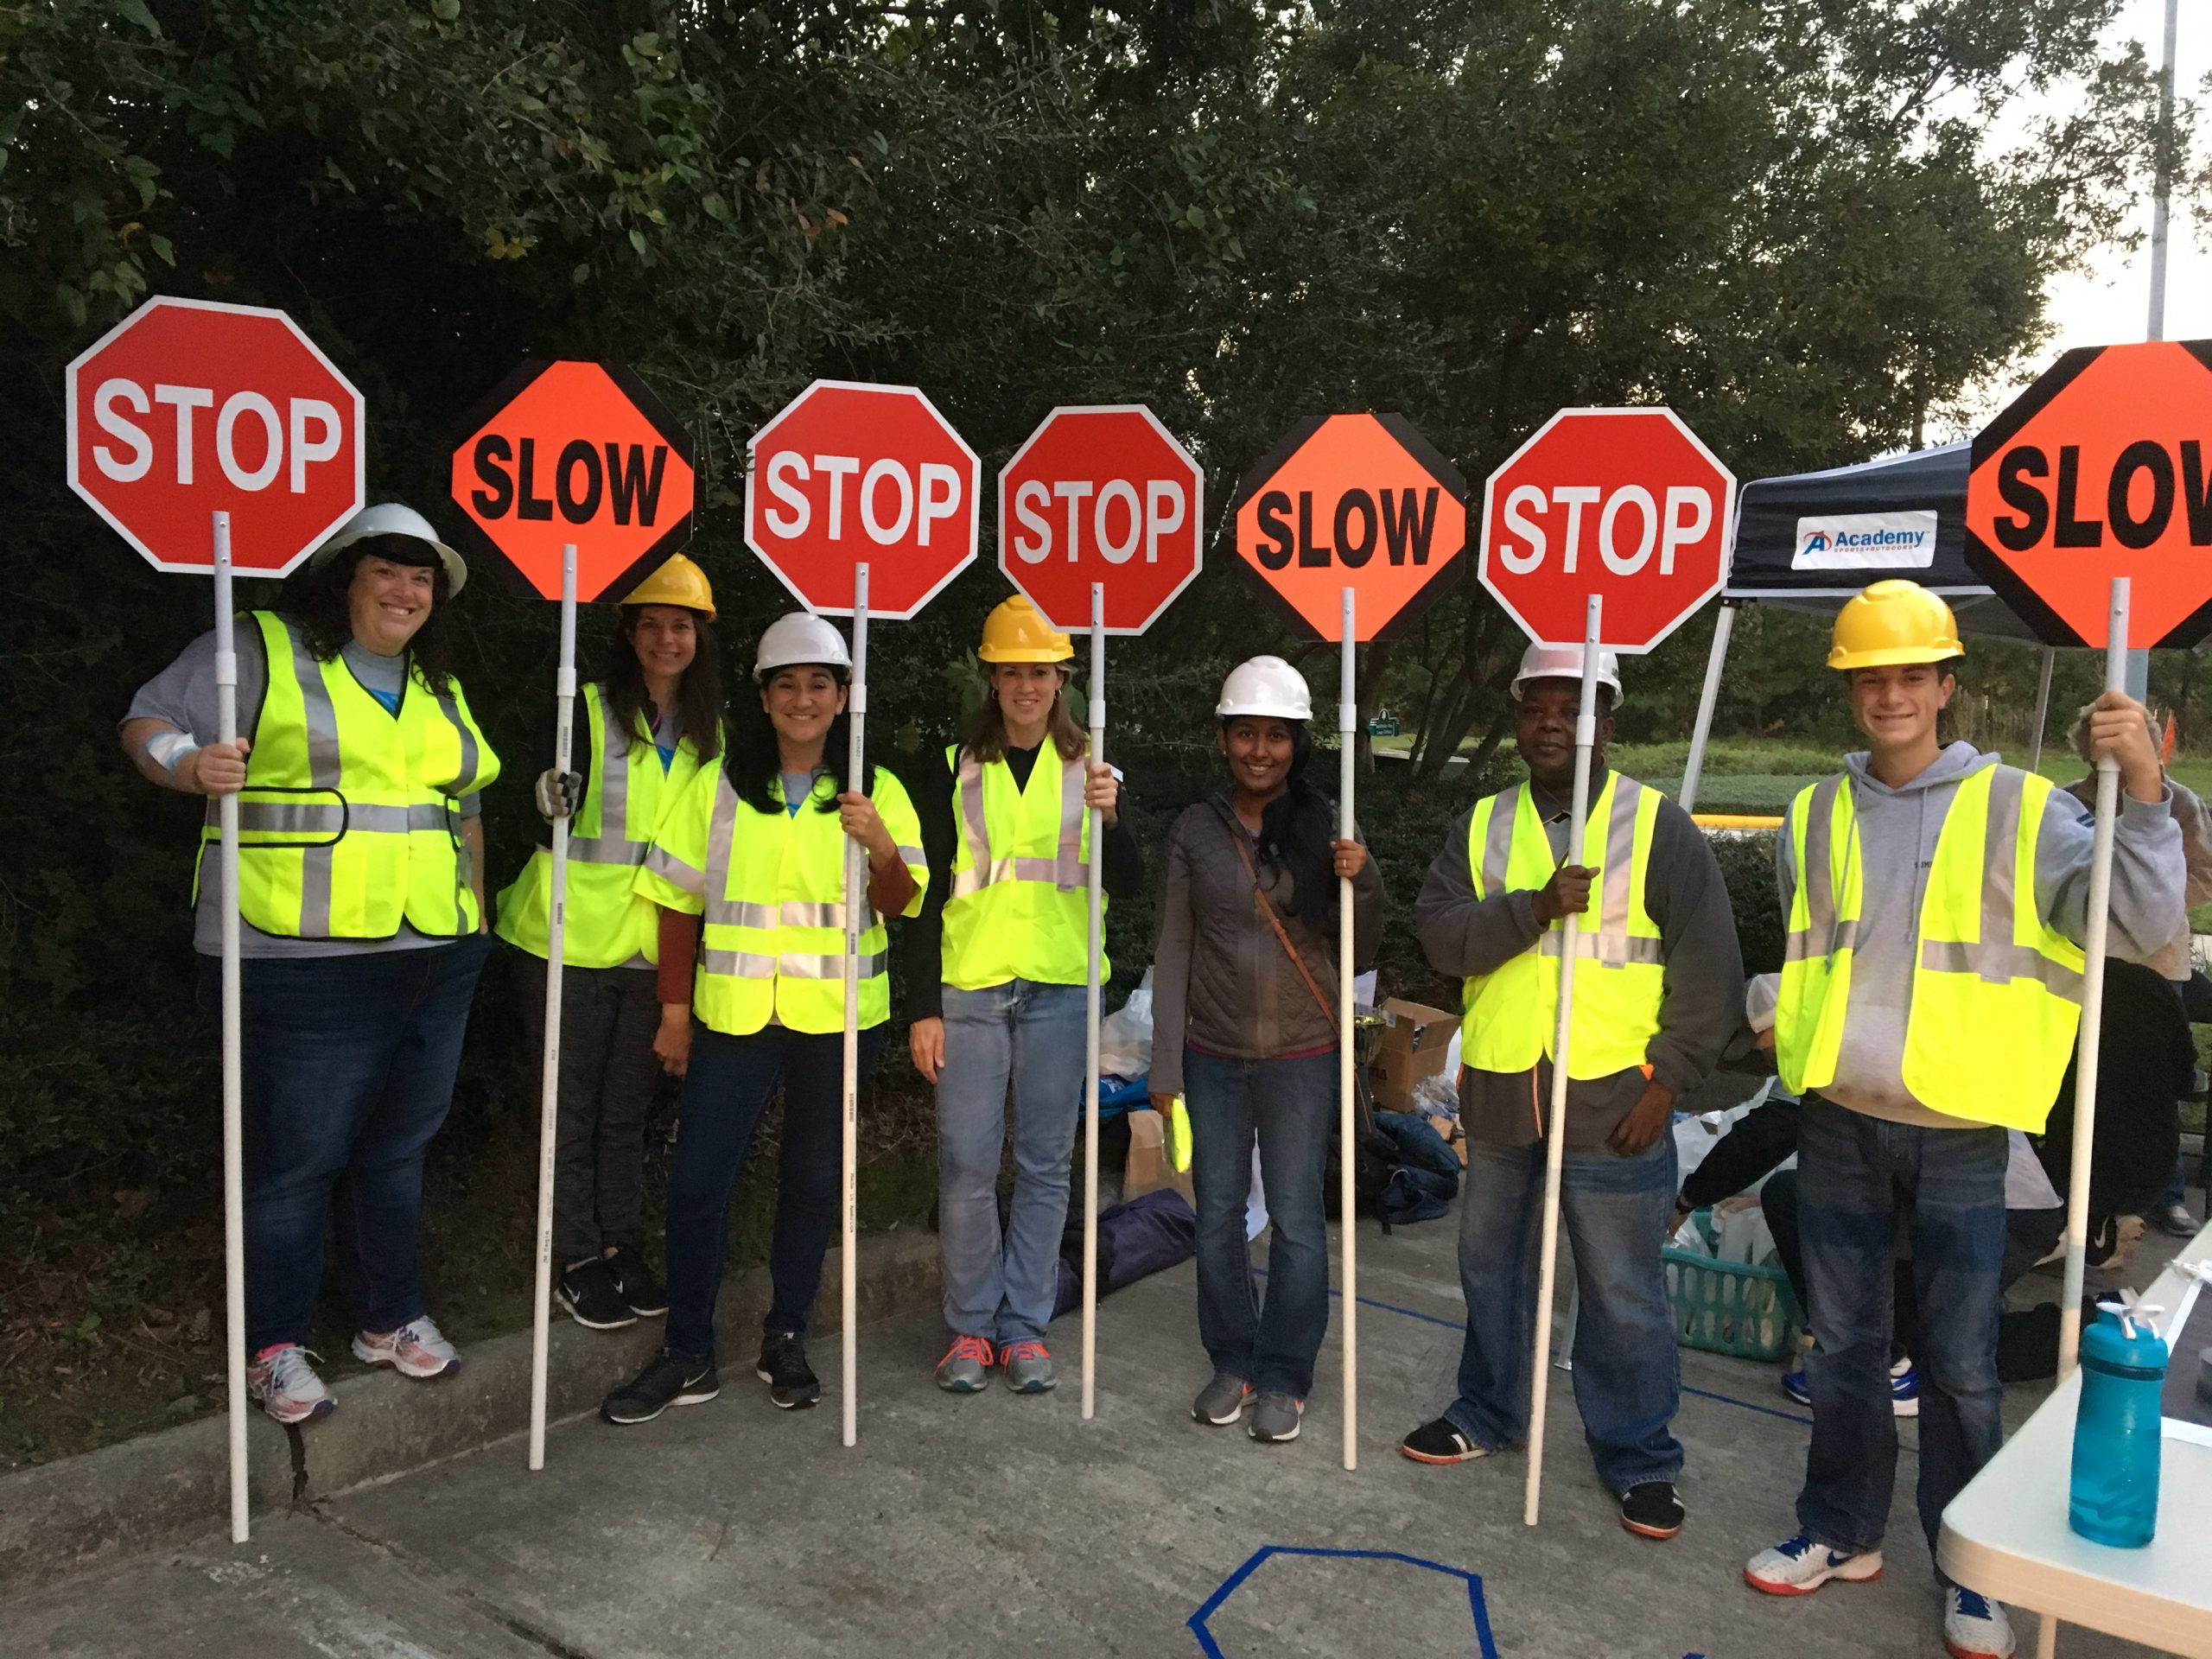 seven people standing in a line wearing construction gear holding stop signs